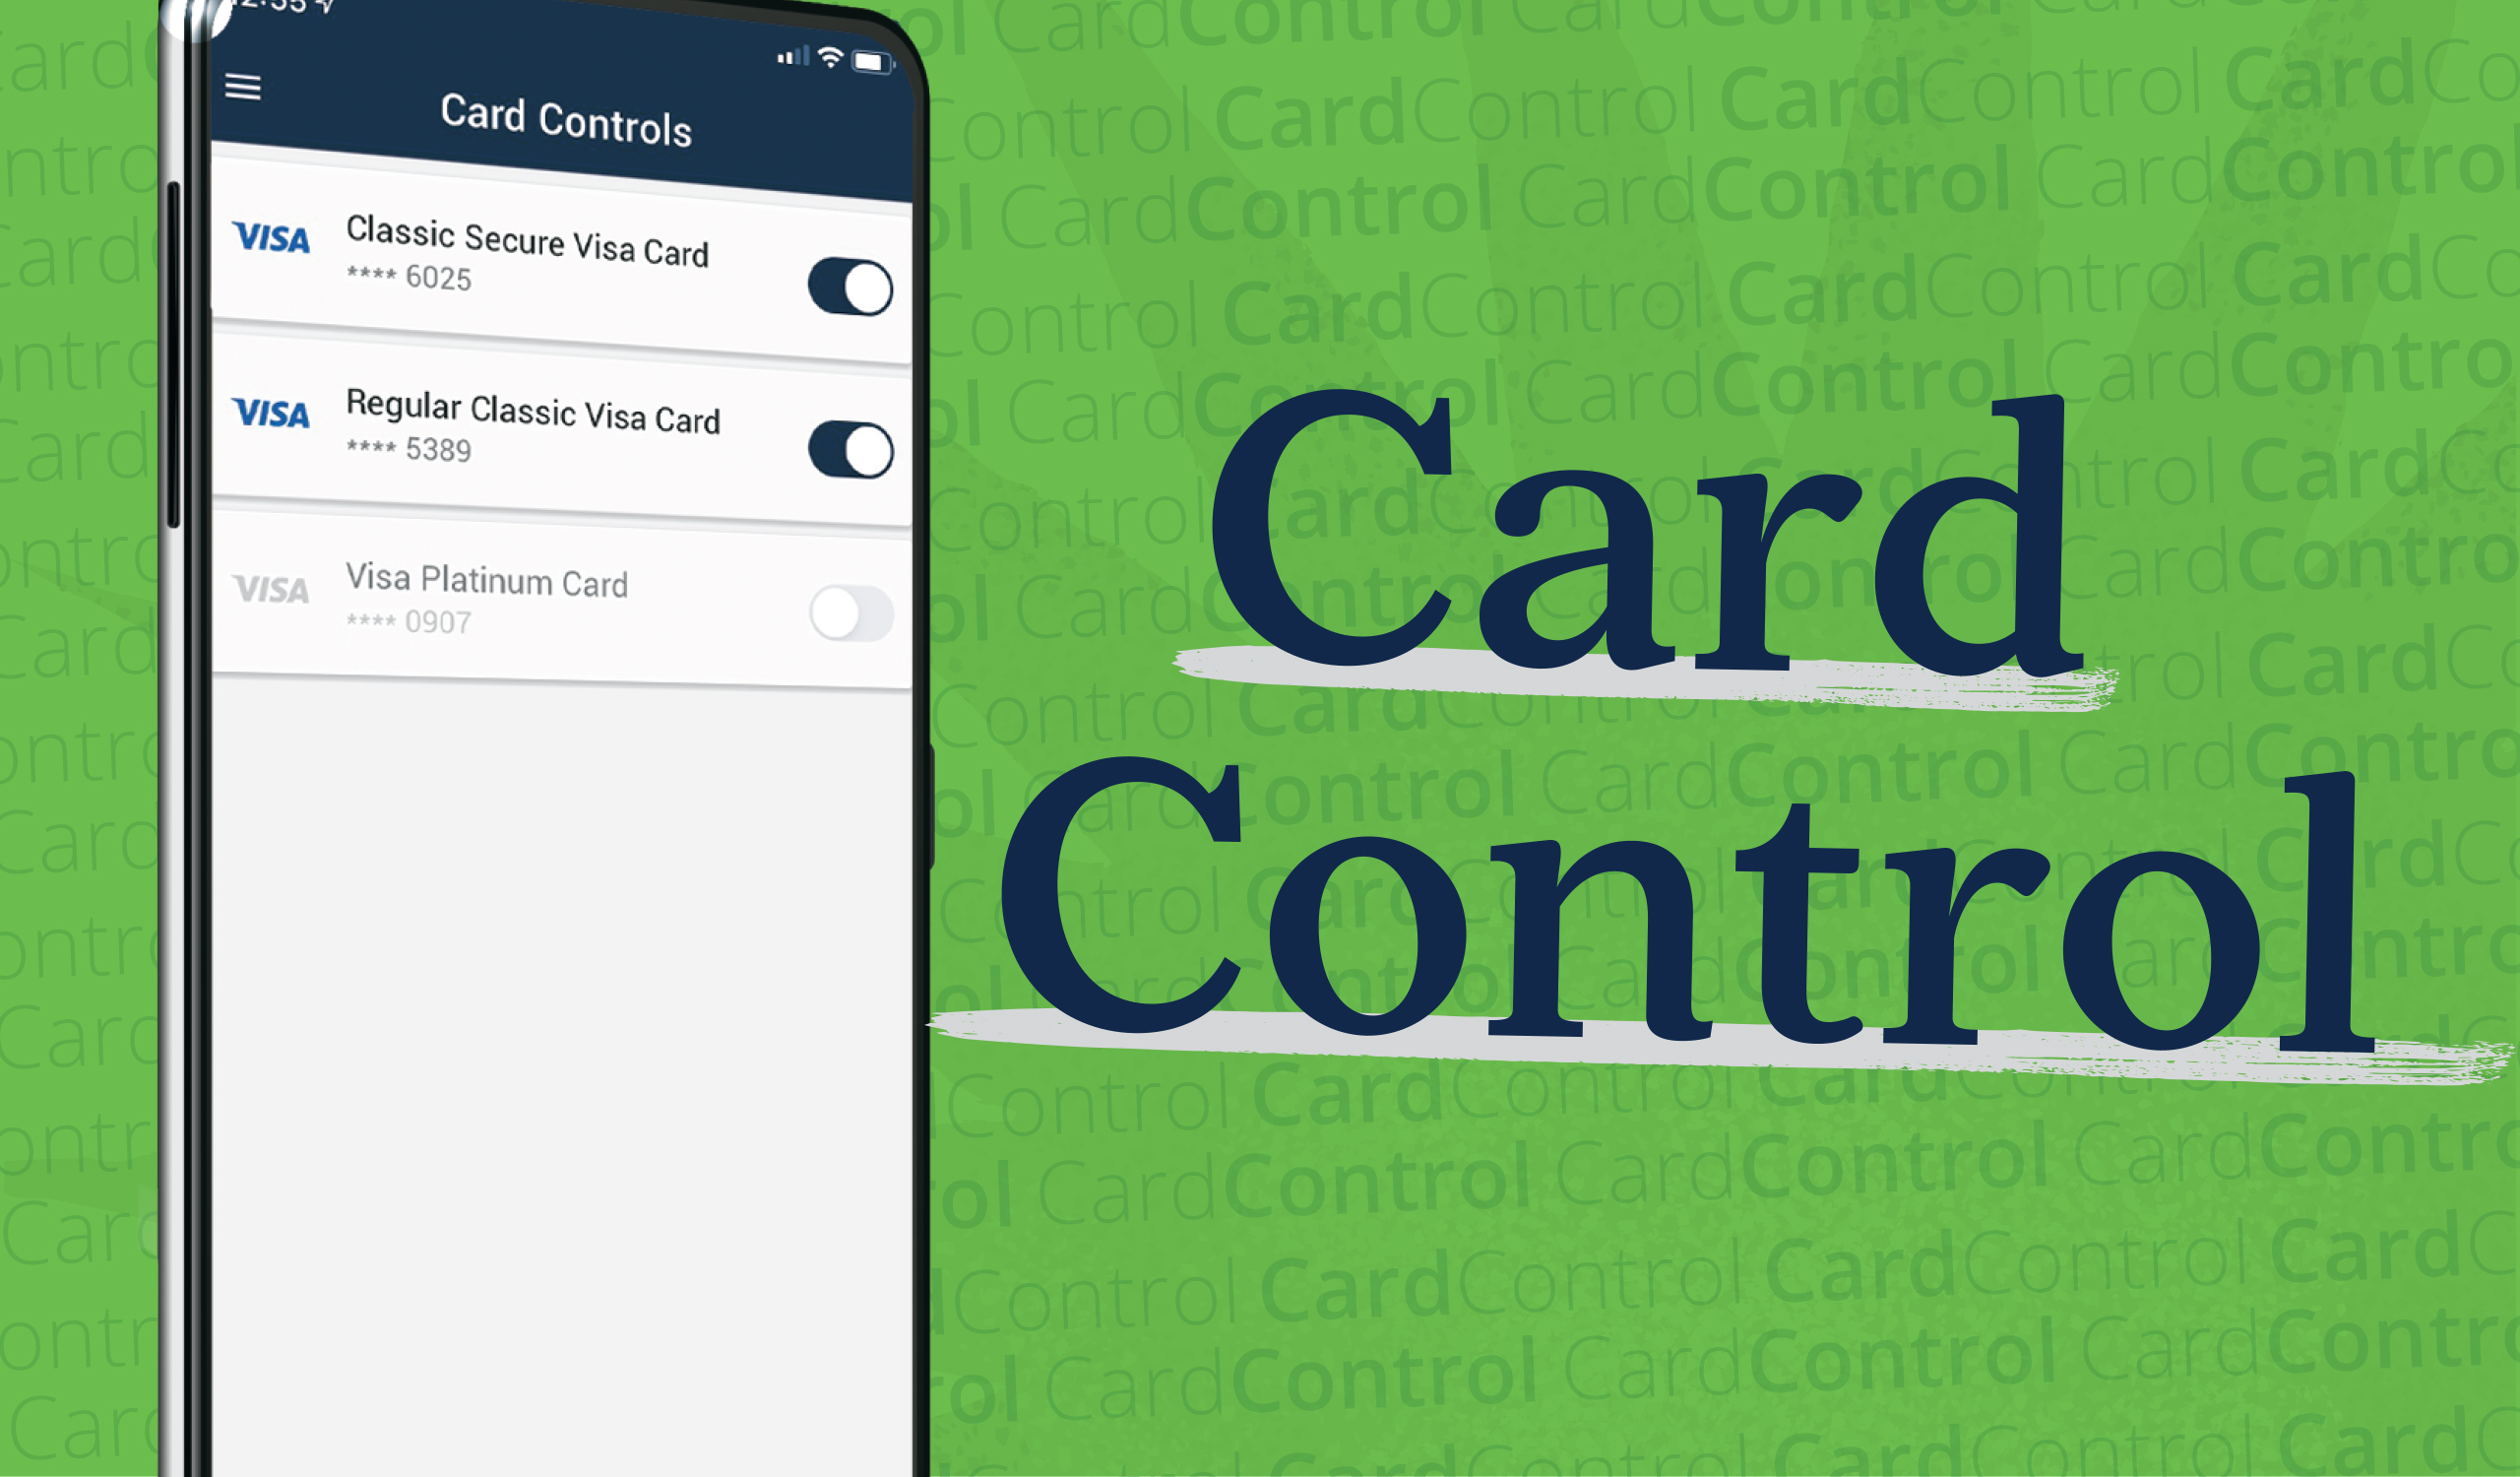 Manage your cards with Card Controls